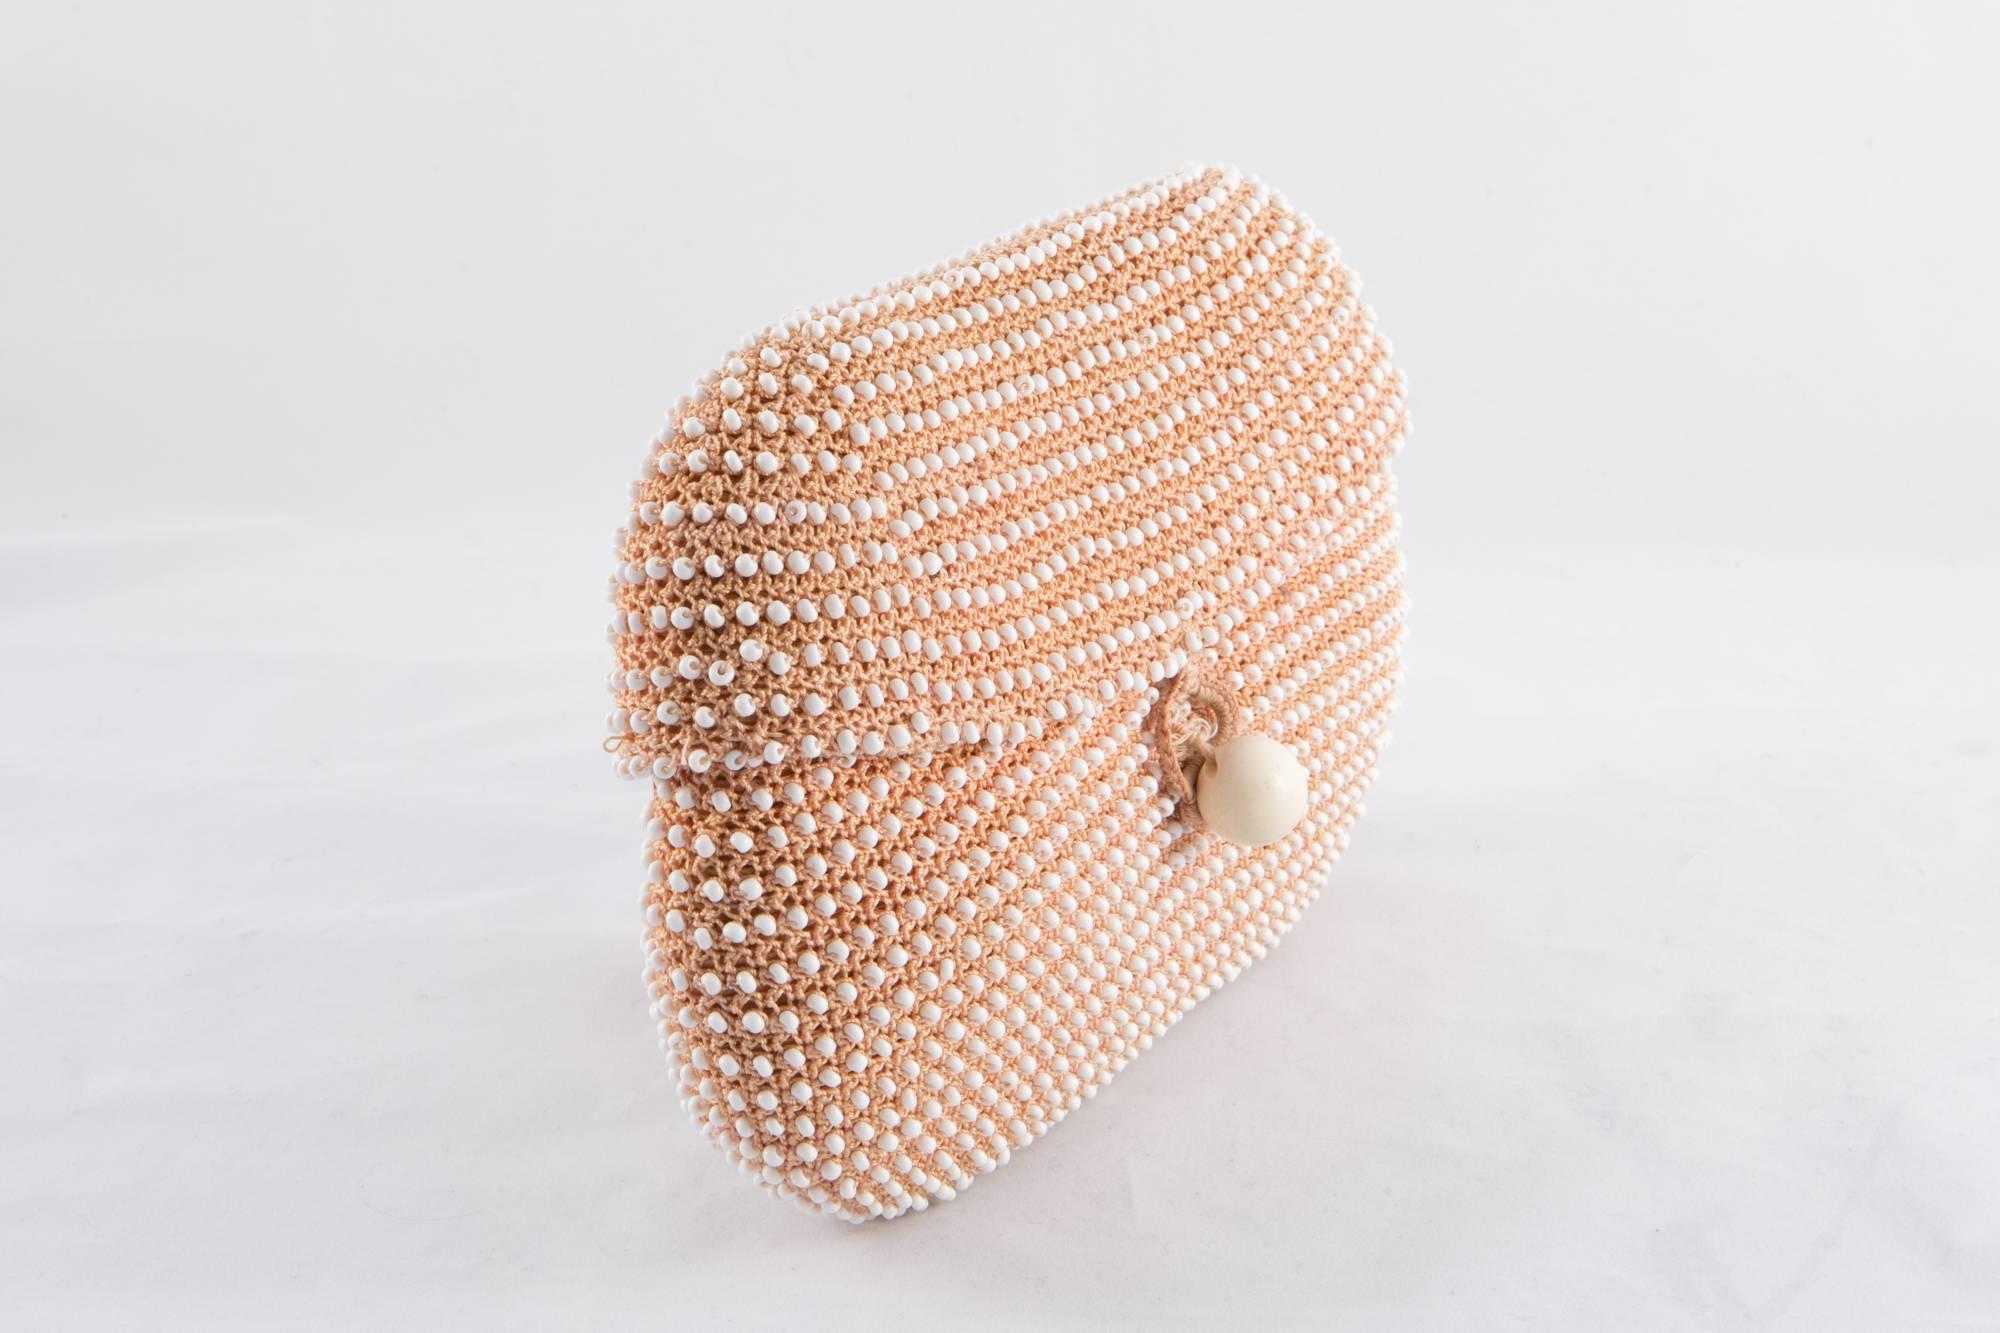 1960s camel crochet and white beaded evening clutch bag featuring a pink silk lining, a crochet loop and a large pearl button closure.
In excellent vintage condition. Made in Italy.
Measurements: 9.05in. (23cm) X 6.2in. (16 cm) X Depth 1.18in. (3cm)